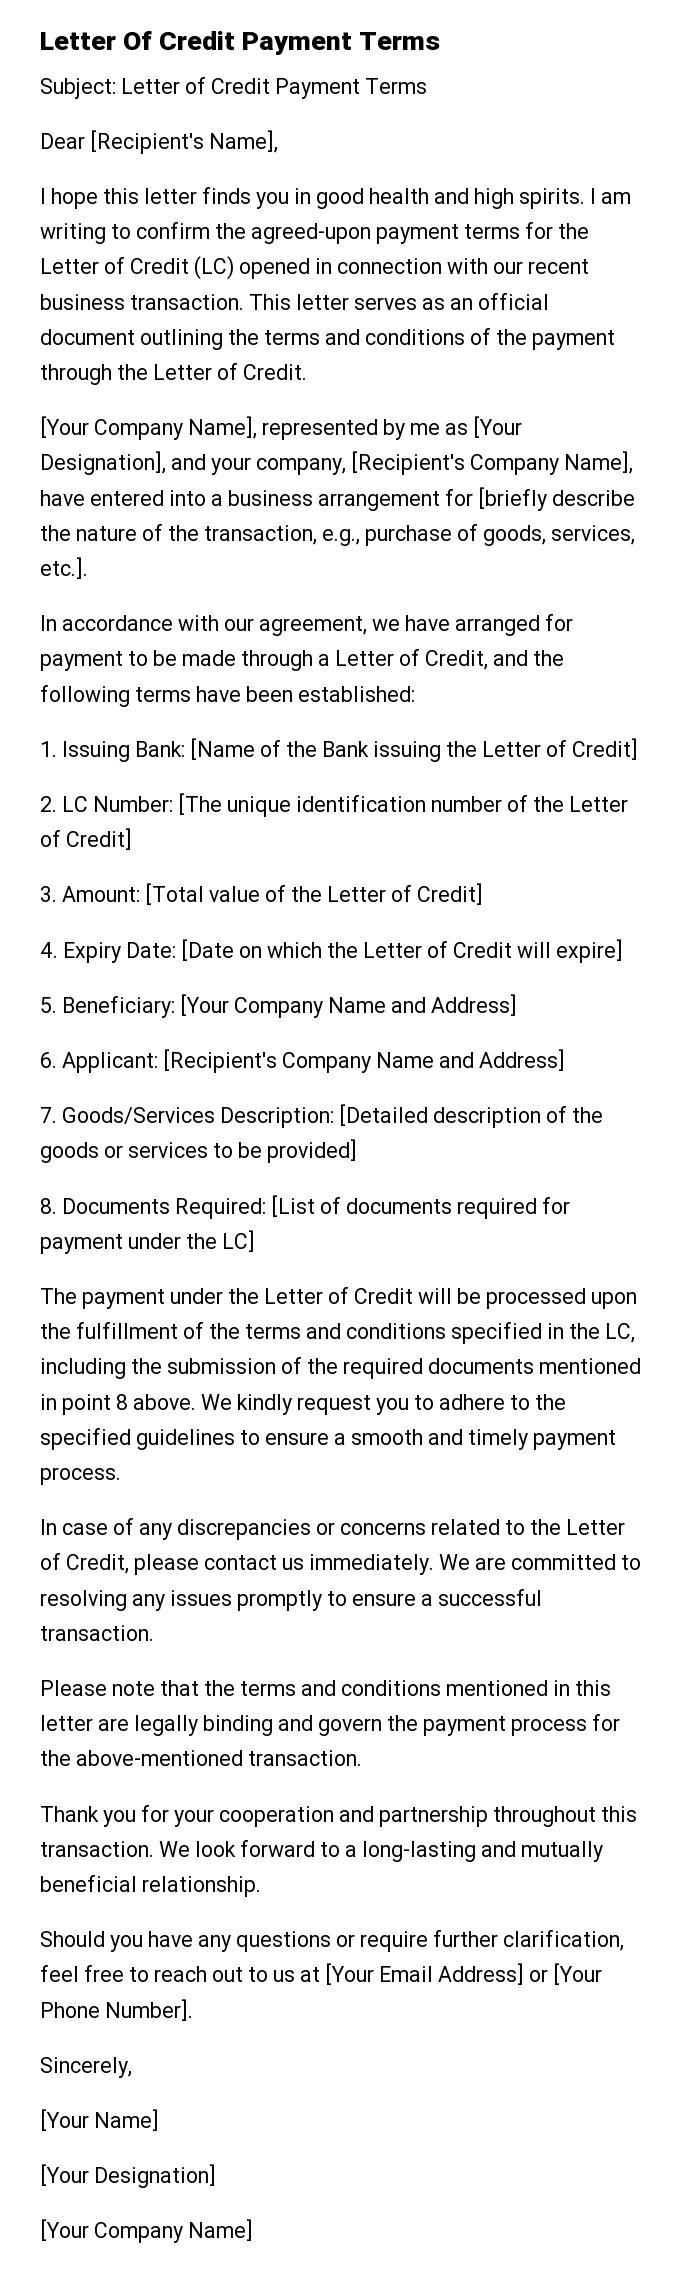 Letter Of Credit Payment Terms